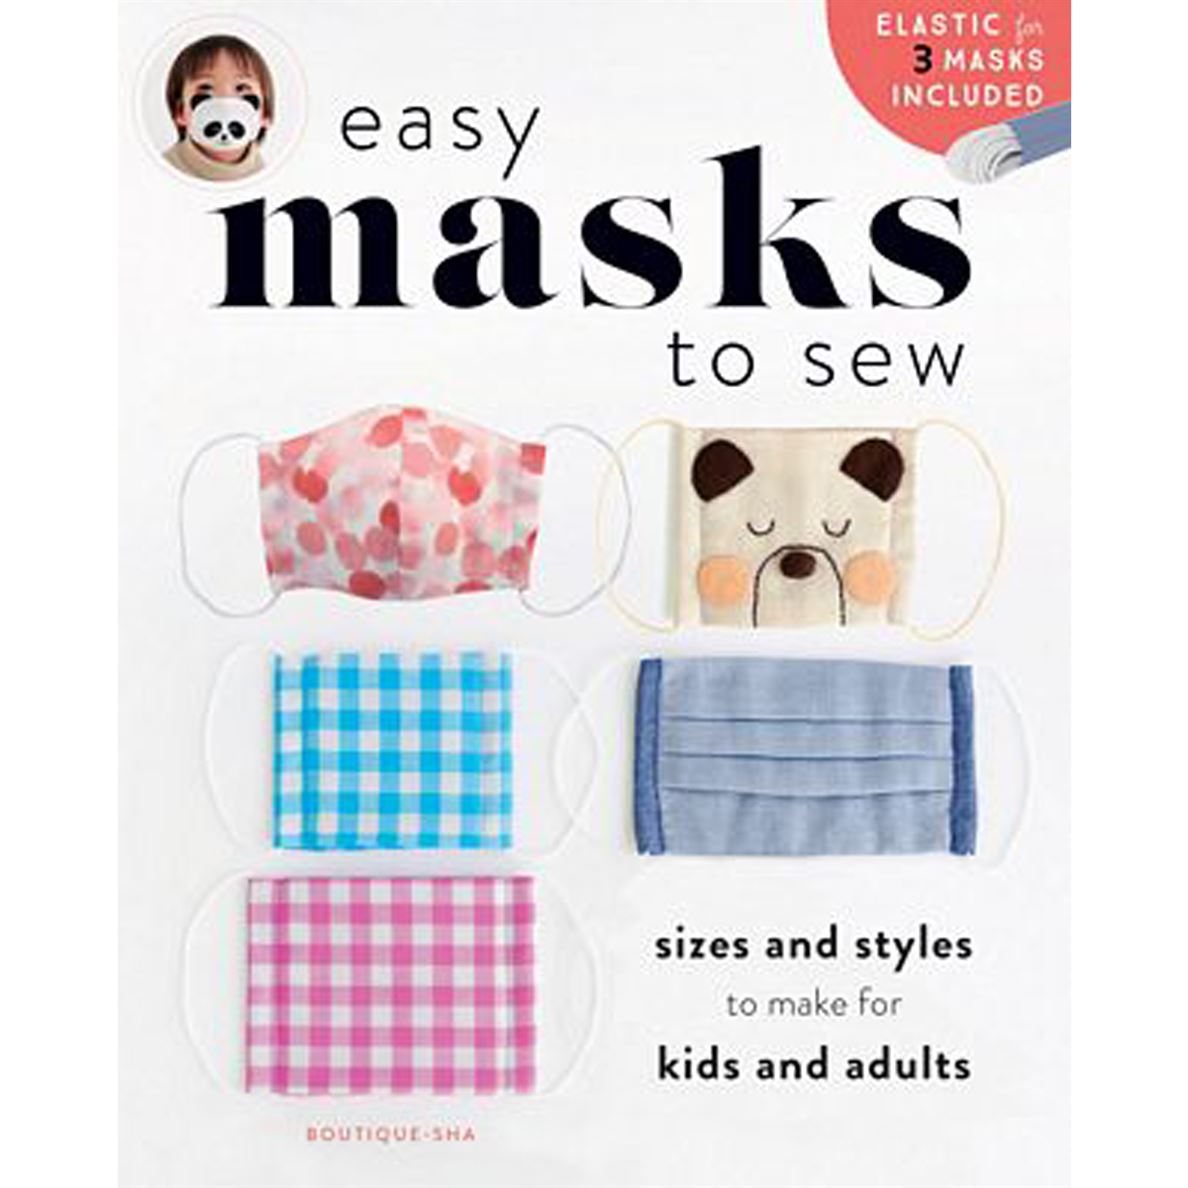 Easy Masks to Sew